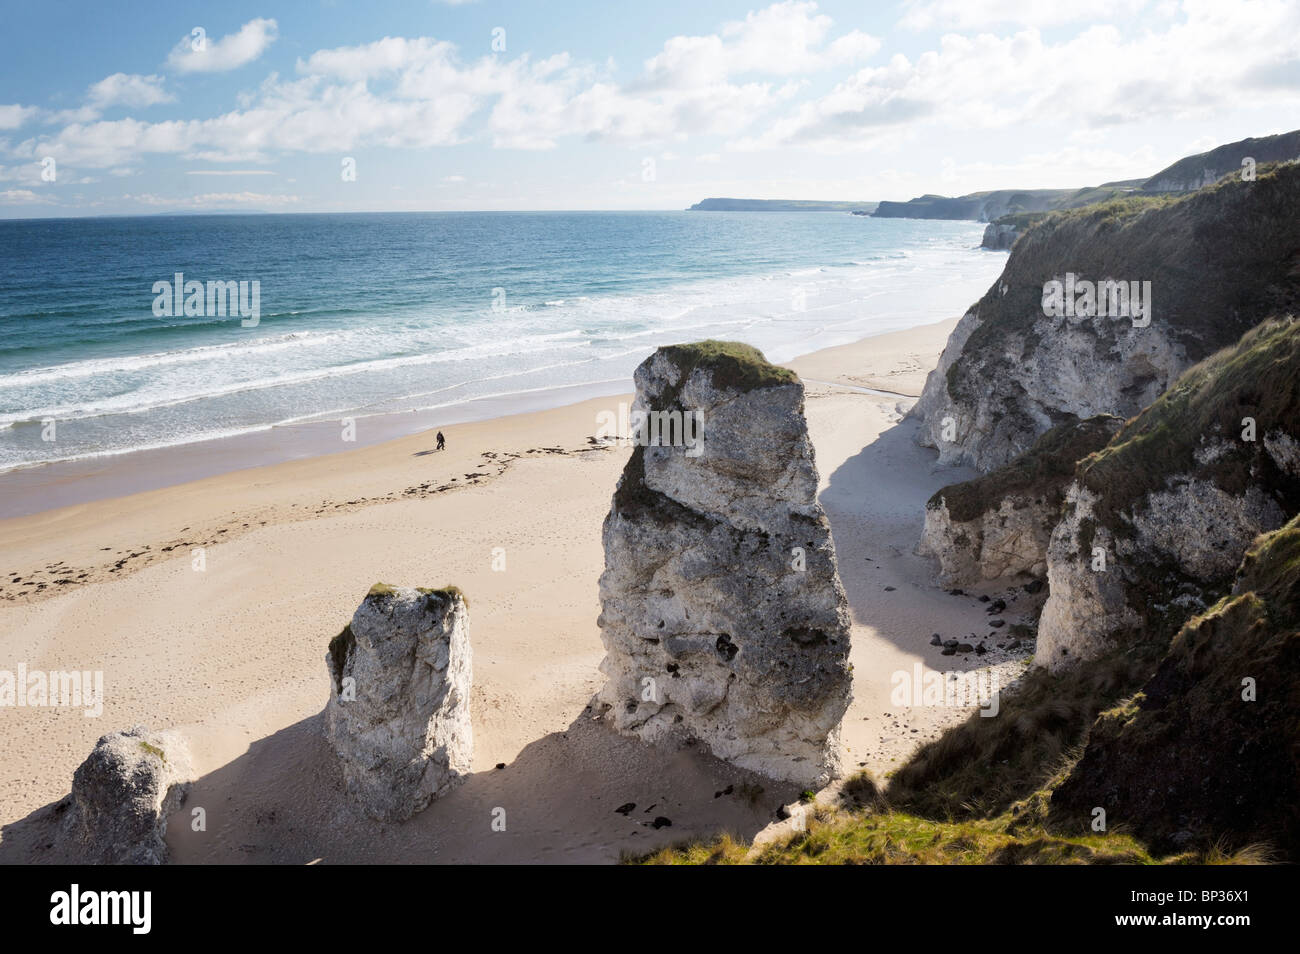 Couple walking alone on beach at the White Rocks between Portrush and Bushmills, Northern Ireland. Eroded limestone cliffs Stock Photo